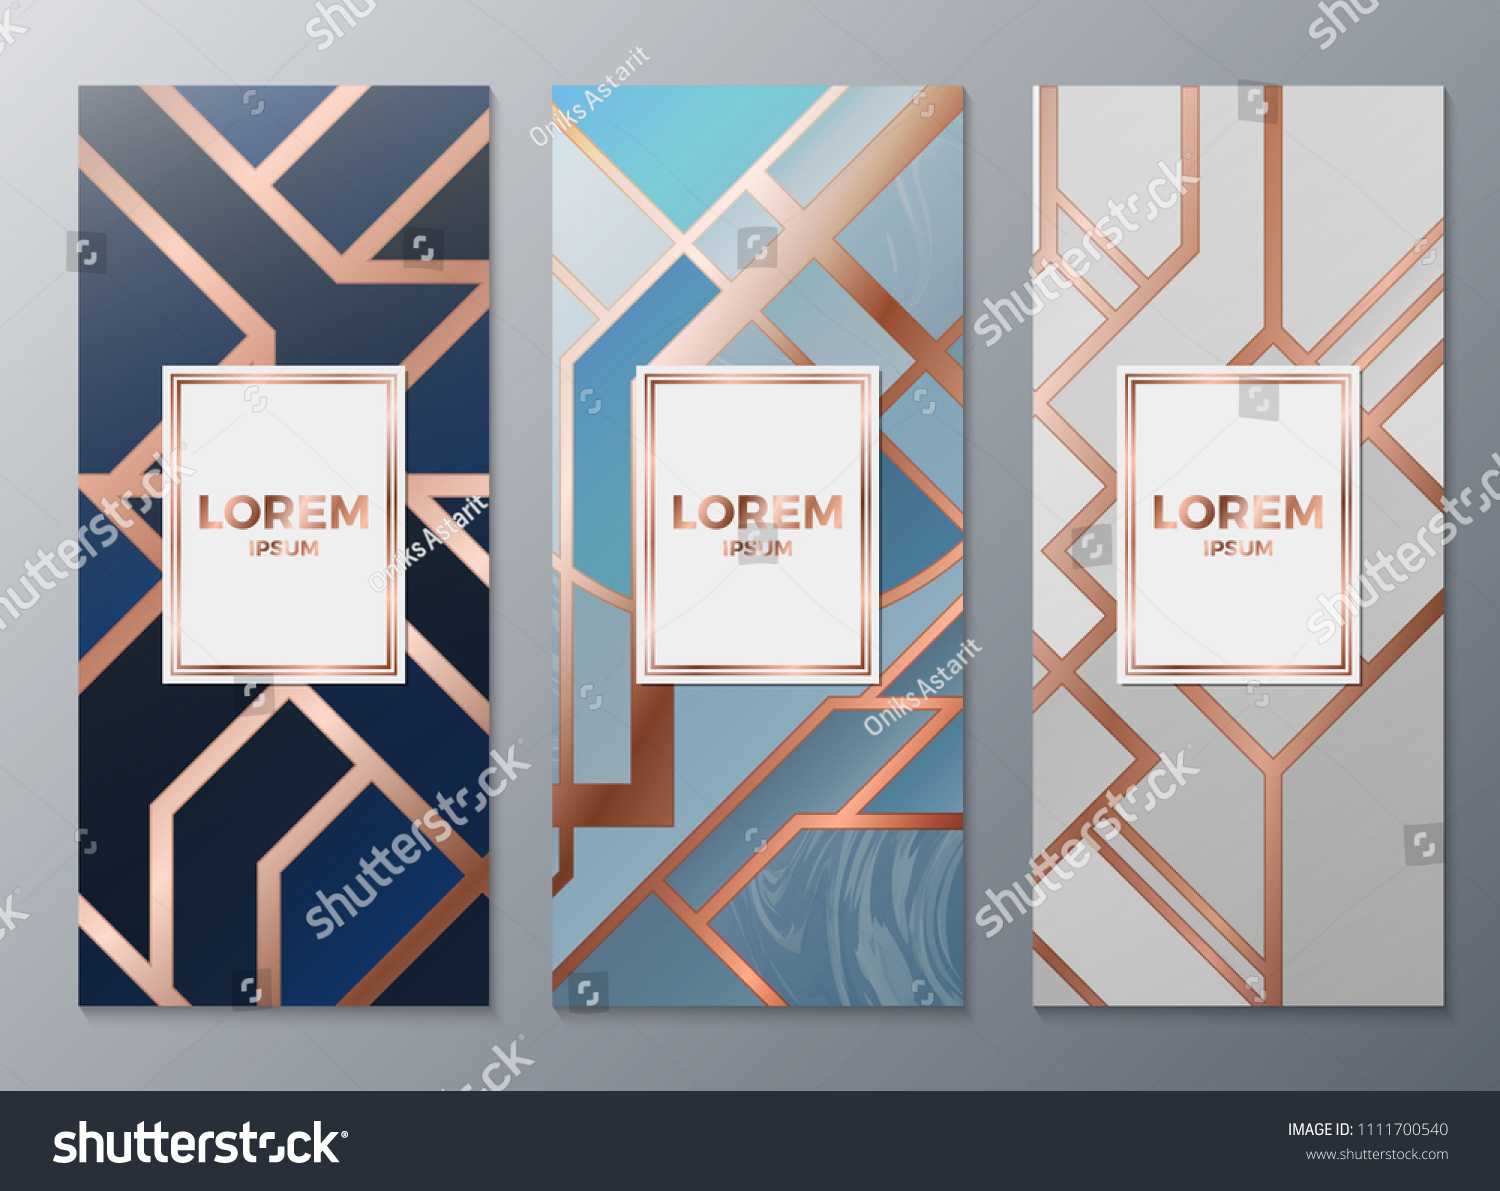 Design Templates Flyers Booklets Greeting Cards Stock Vector For Advertising Cards Templates